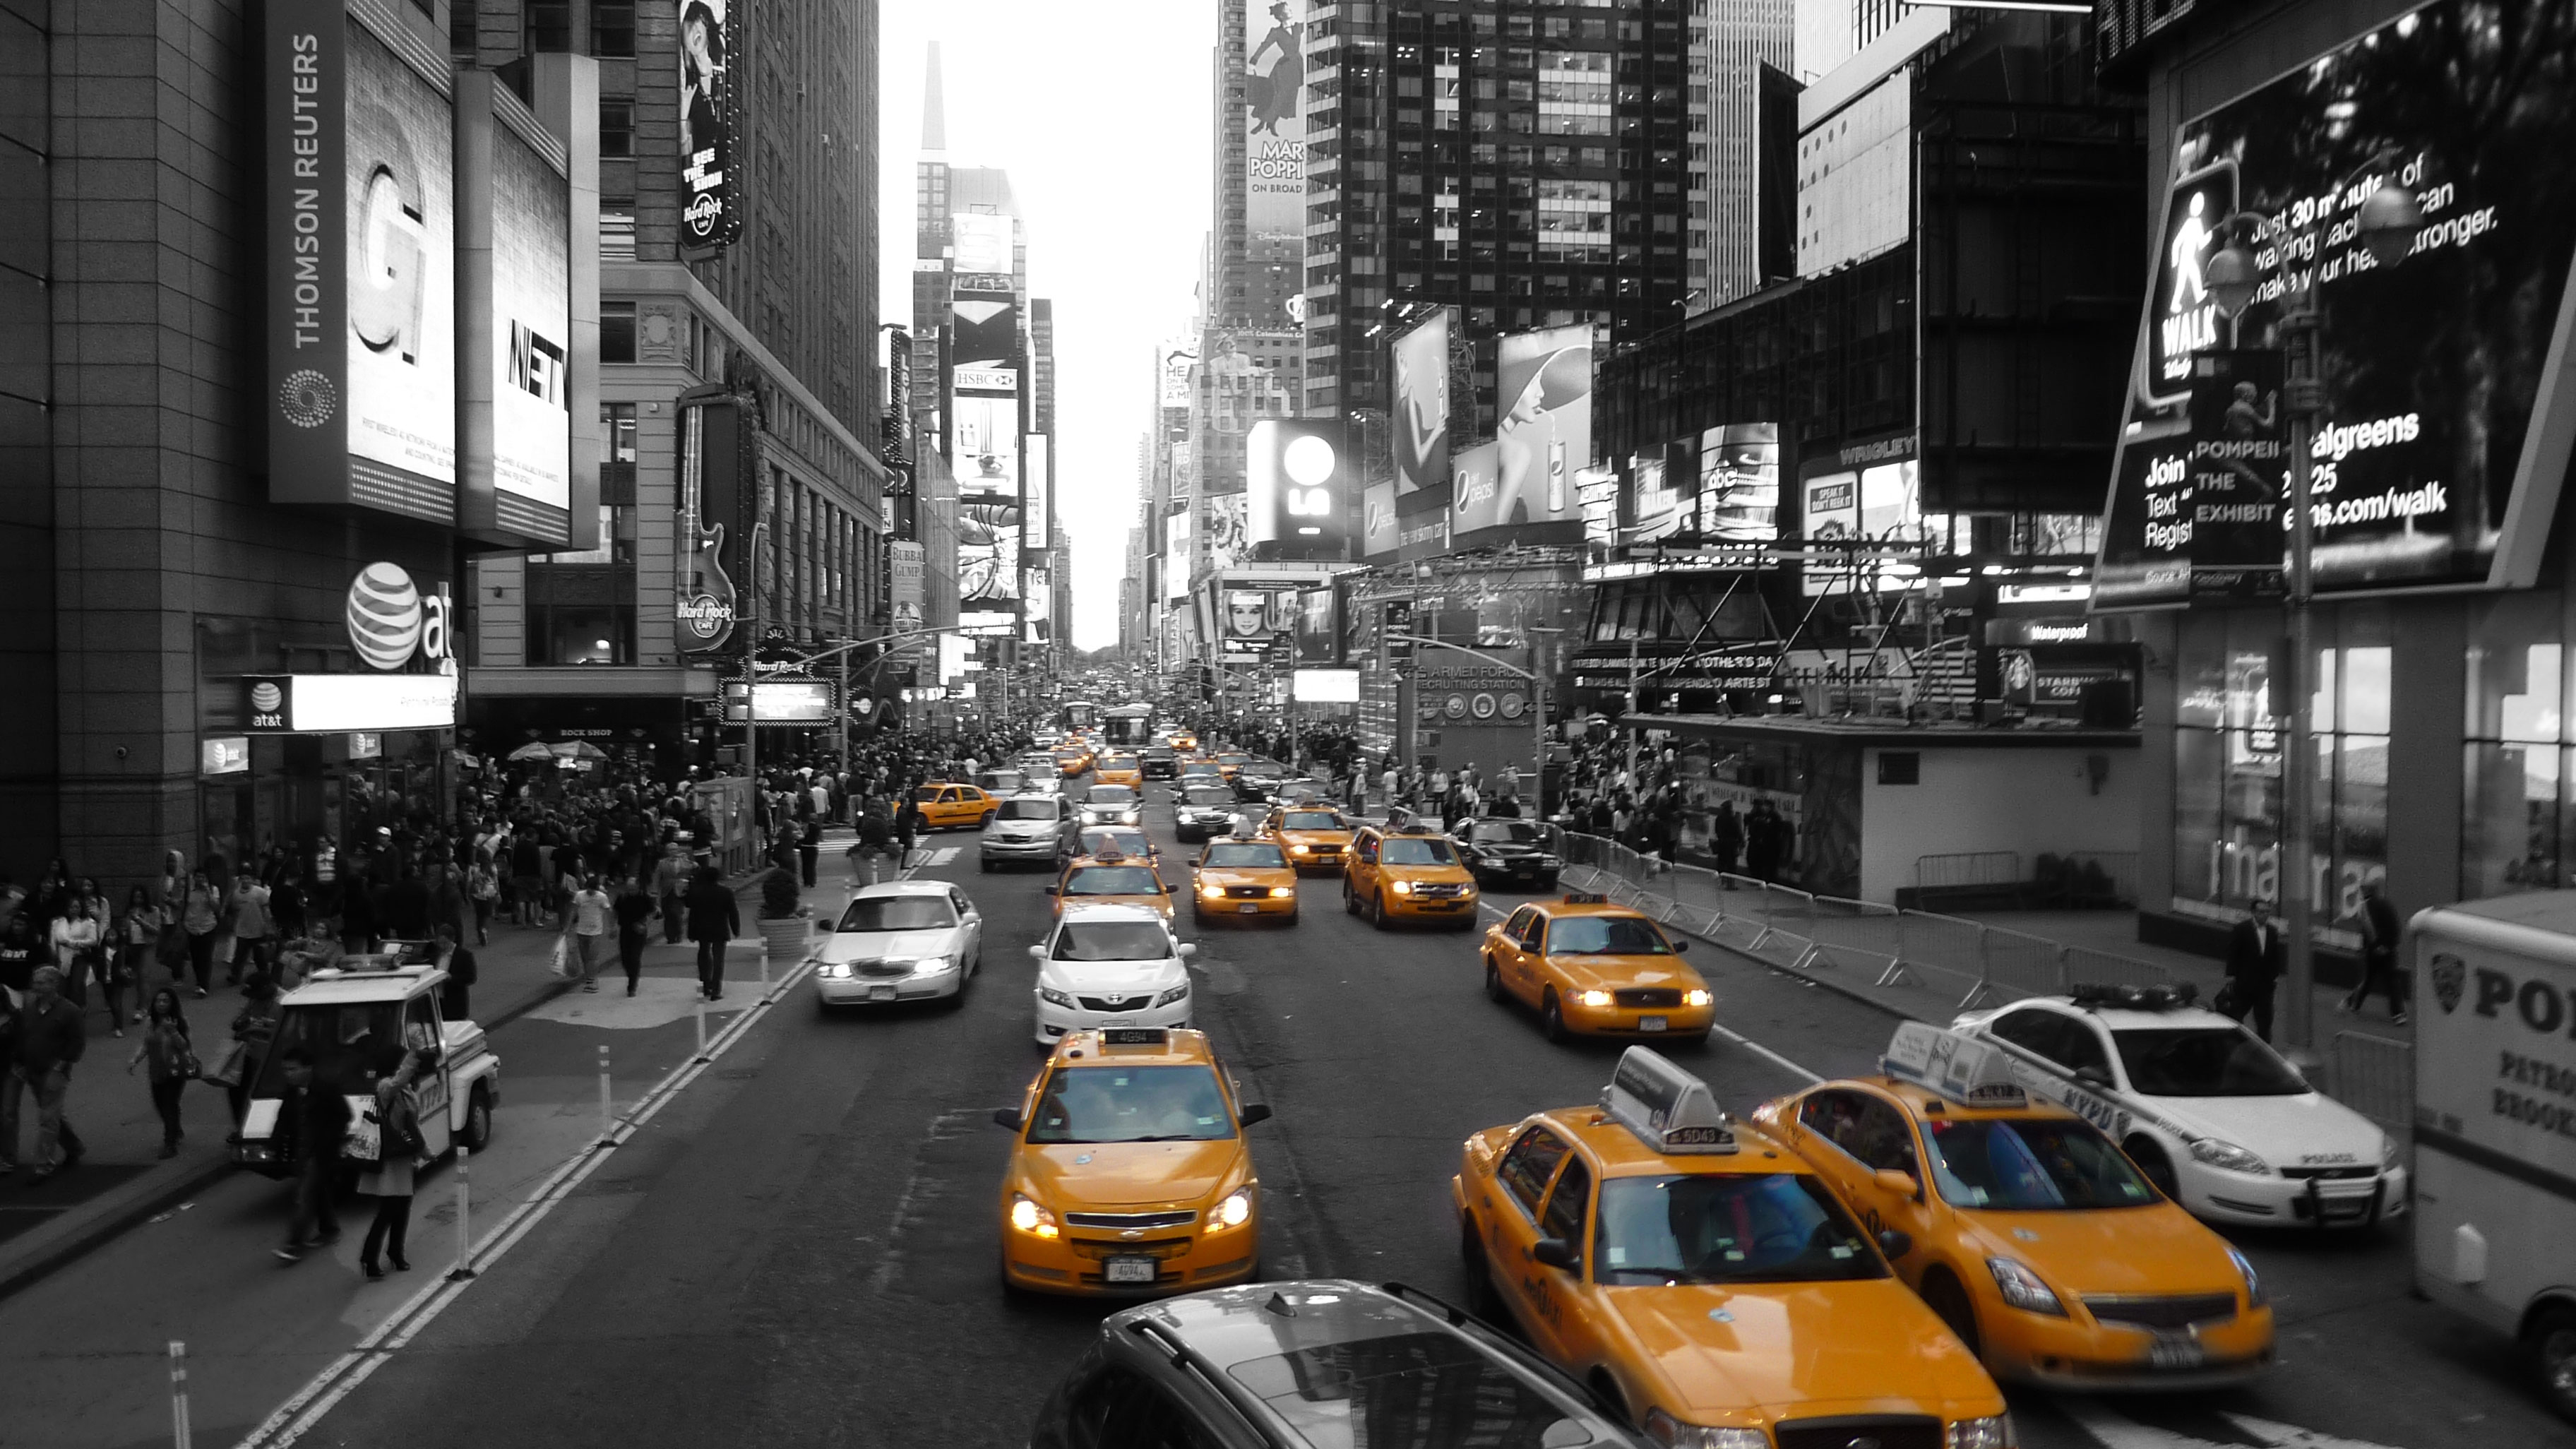 man made, new york, city, selective color, traffic, cities wallpaper for mobile